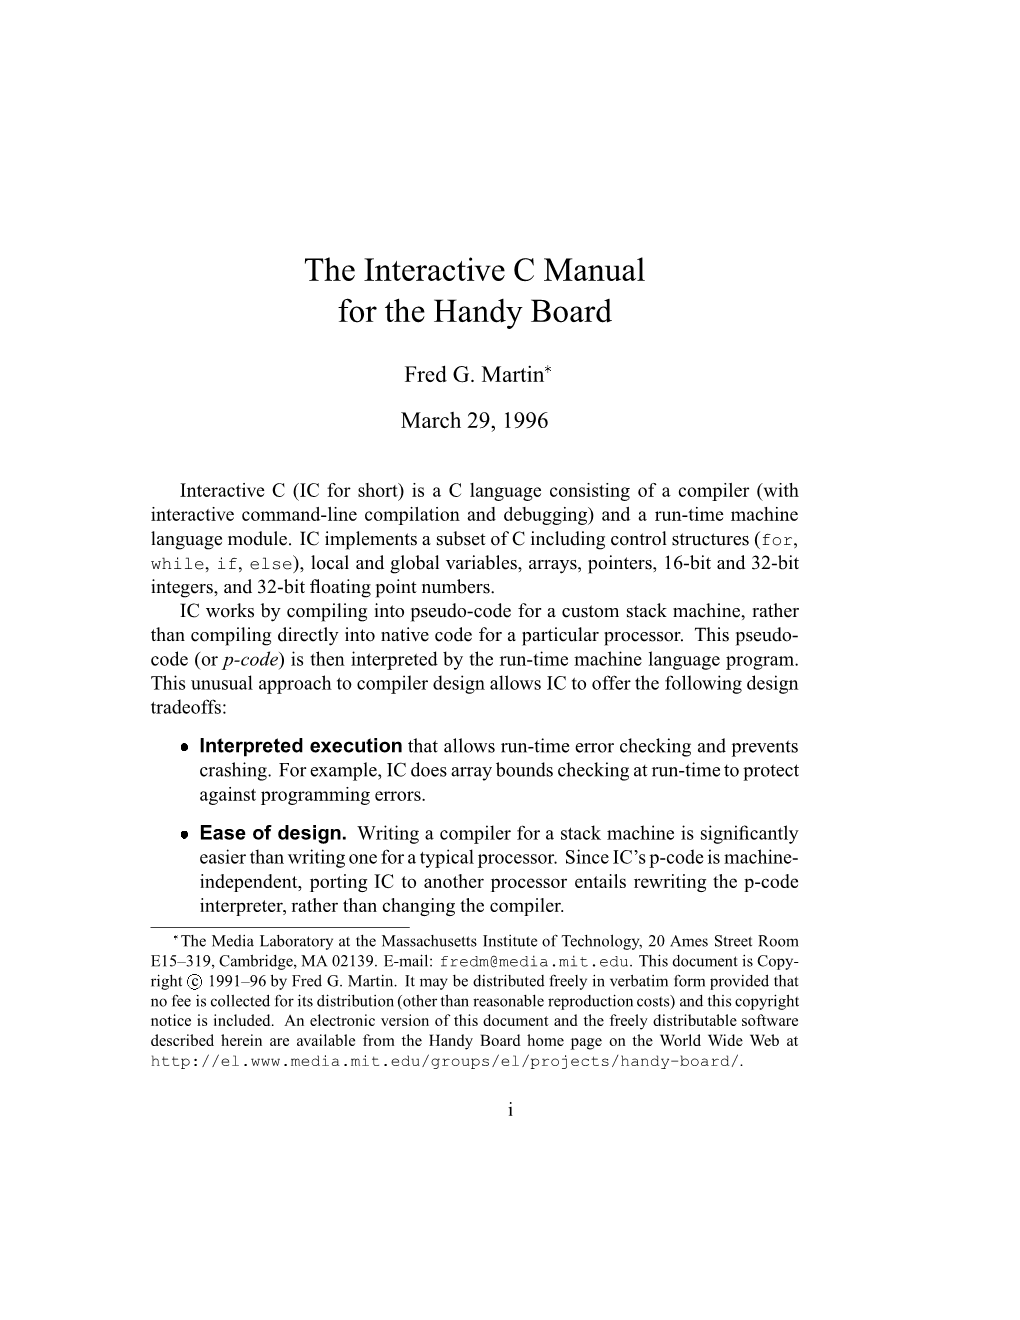 The Interactive C Manual for the Handy Board